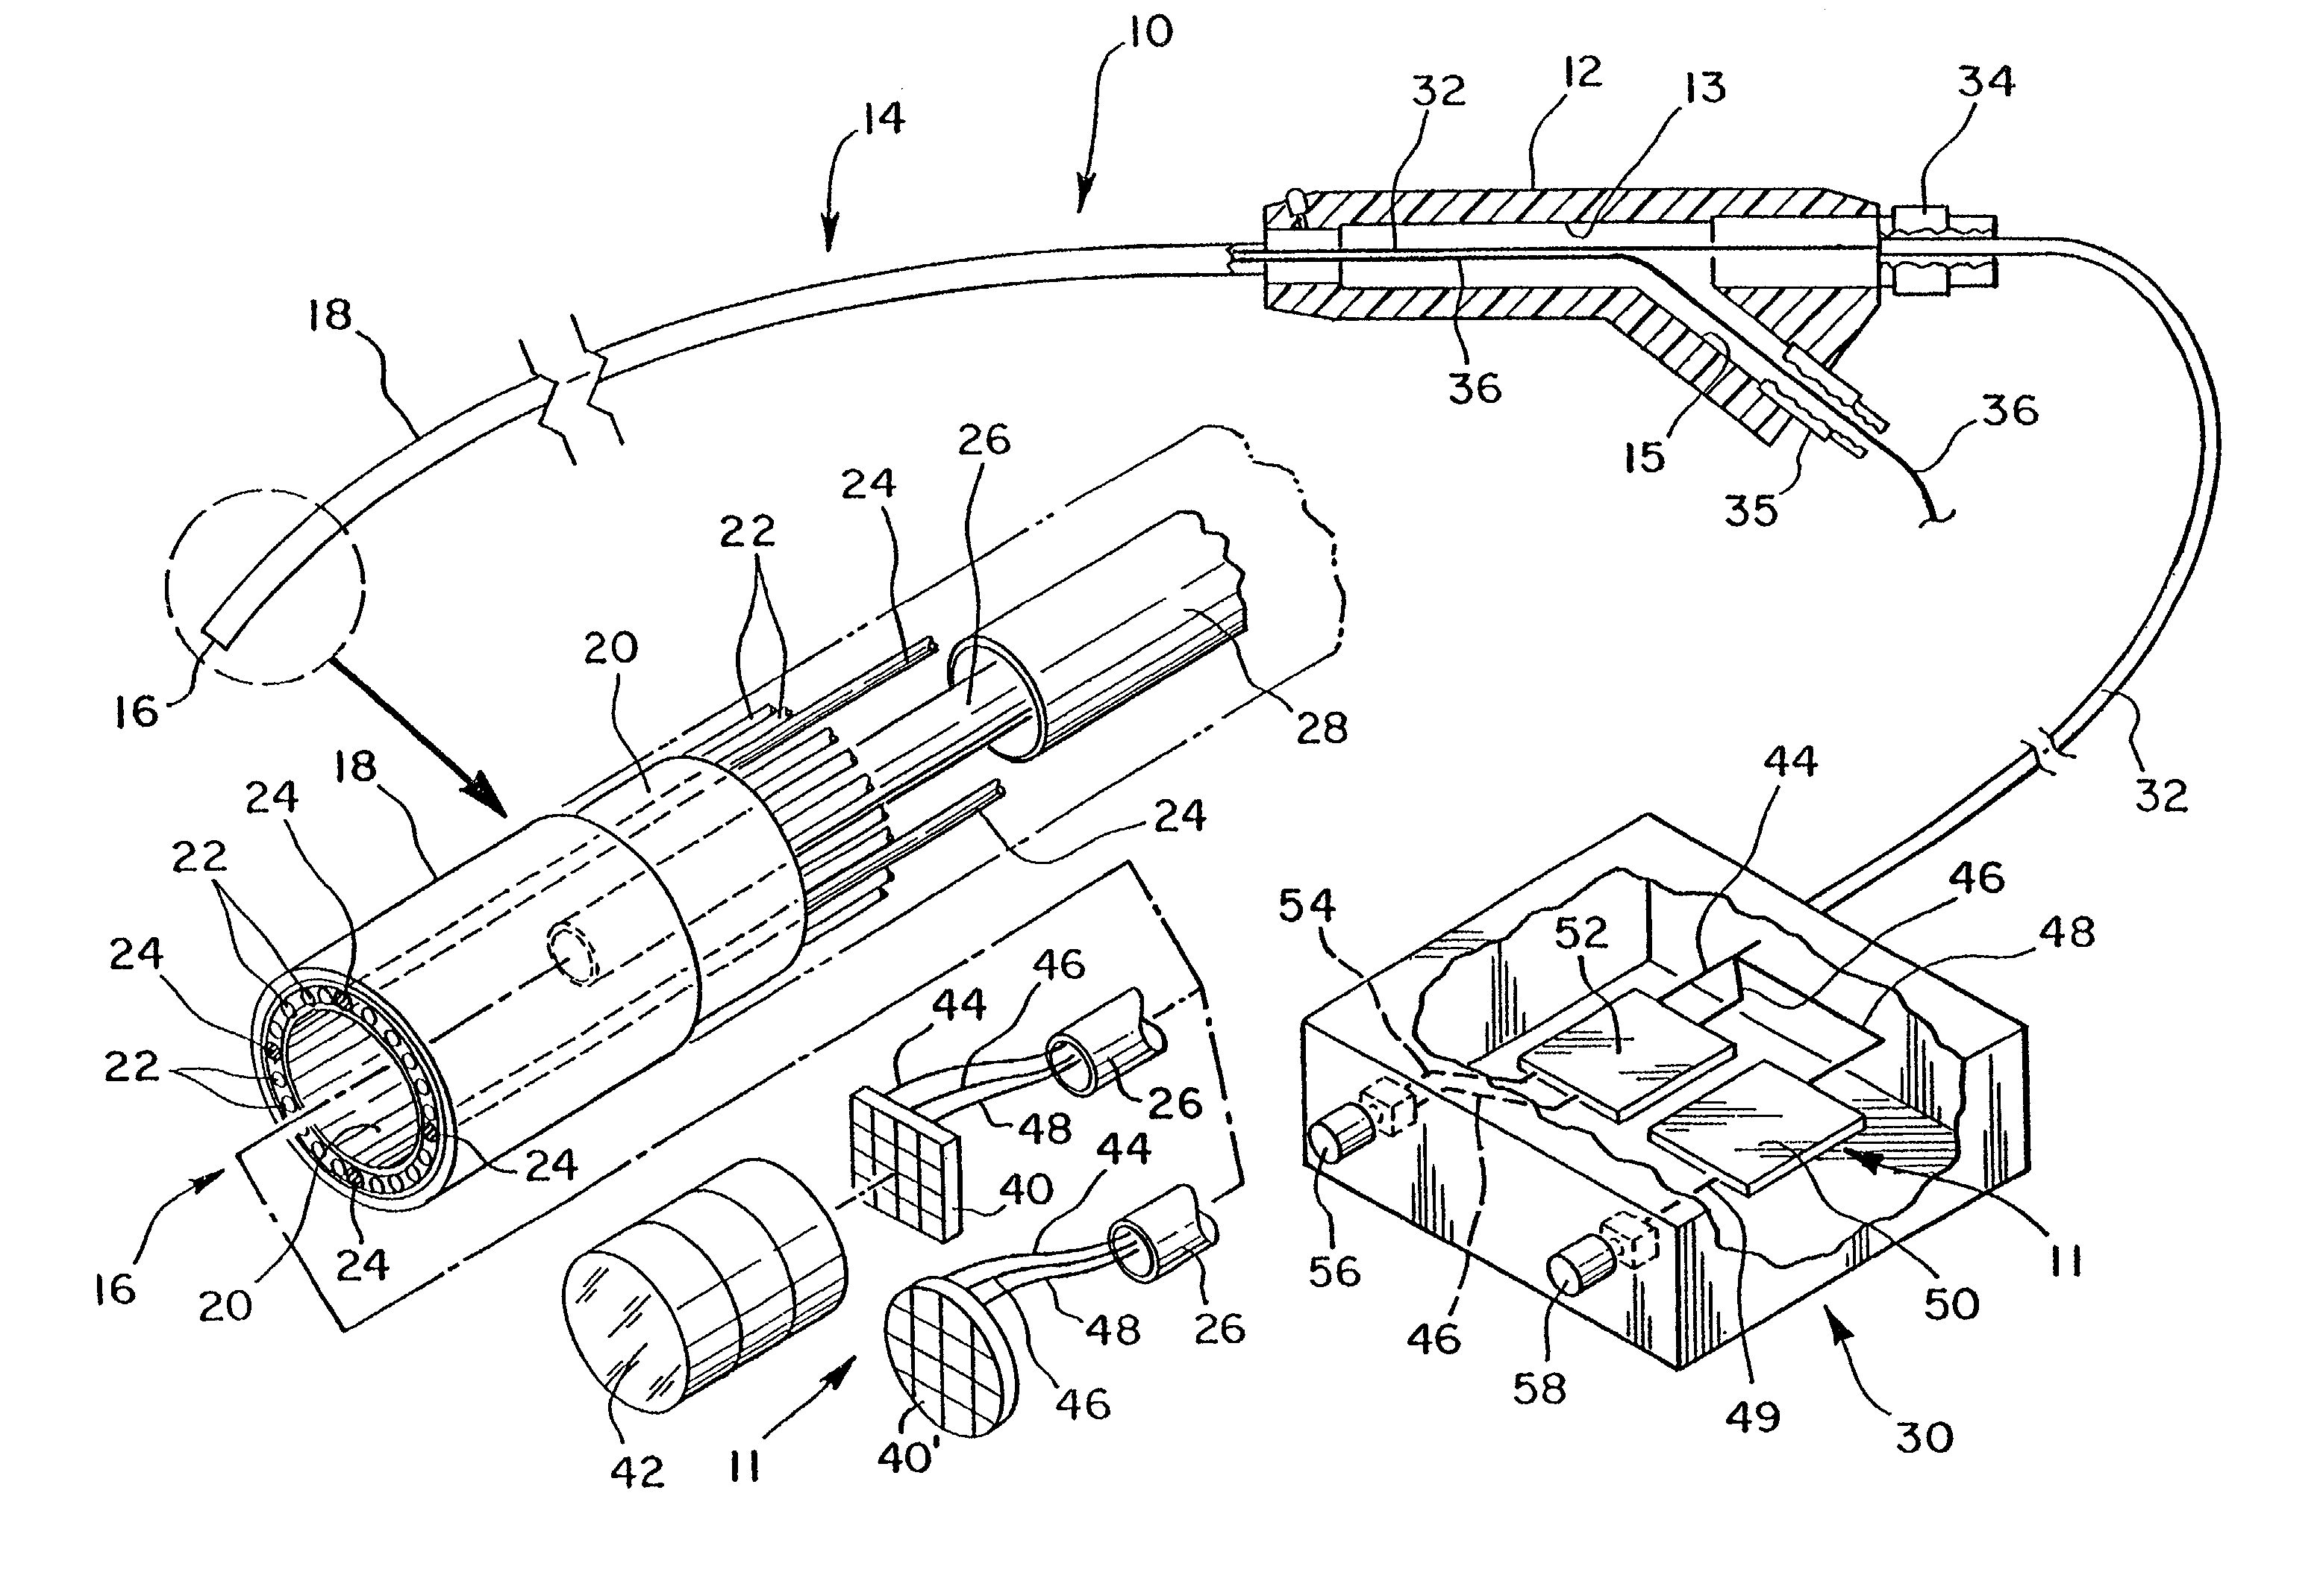 Reduced area imaging devices utilizing selected charge integration periods